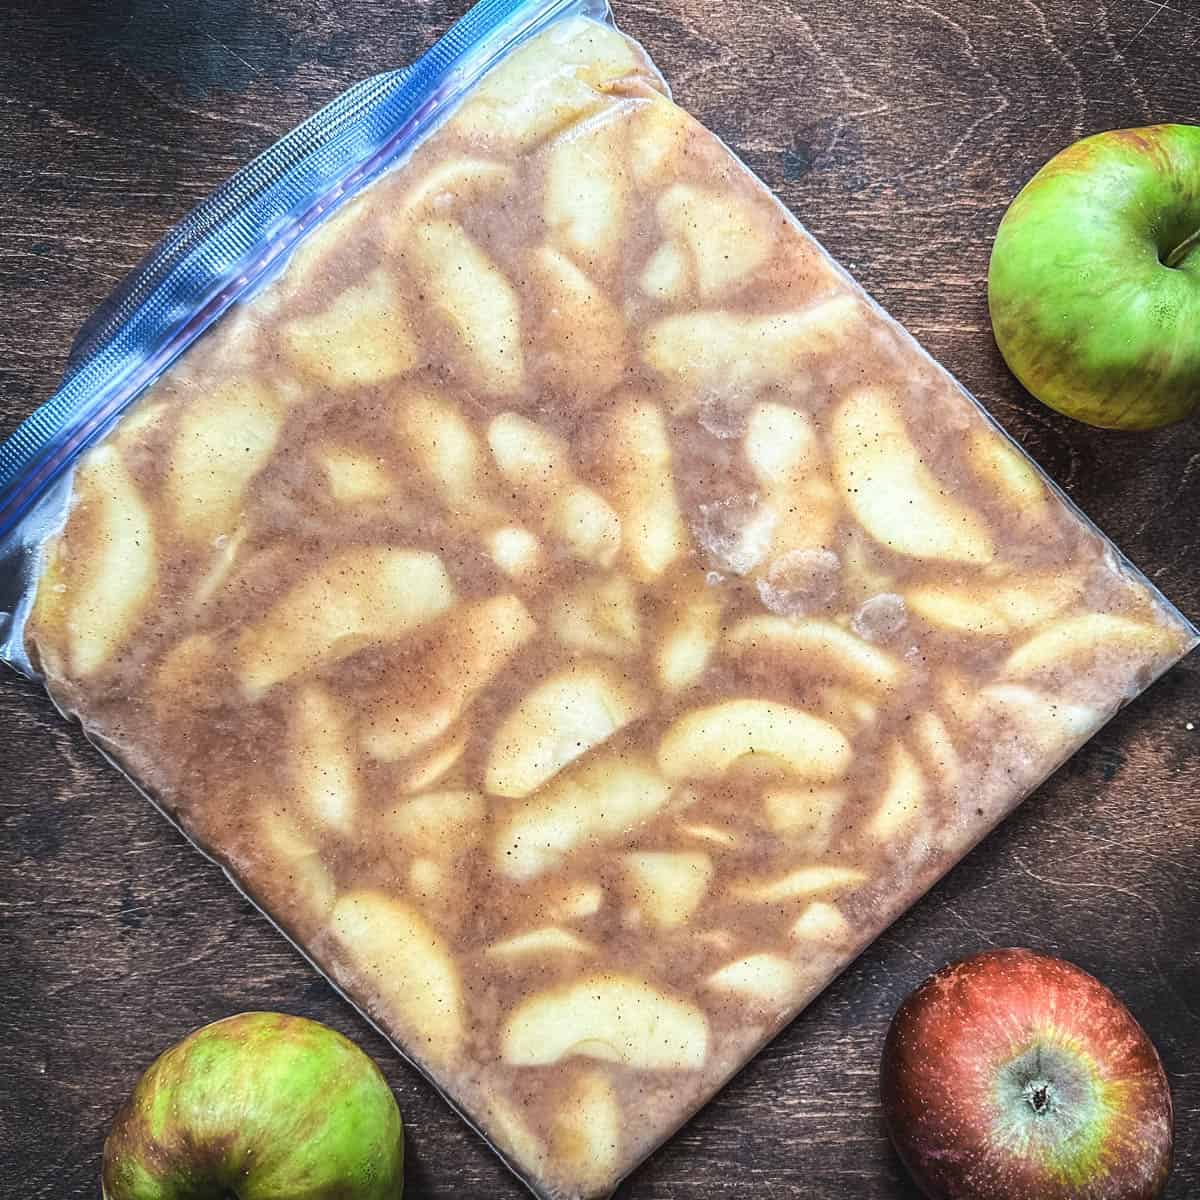 A bag of frozen apple pie filling on a wood surface surrounded by fresh whole apples. Top View.